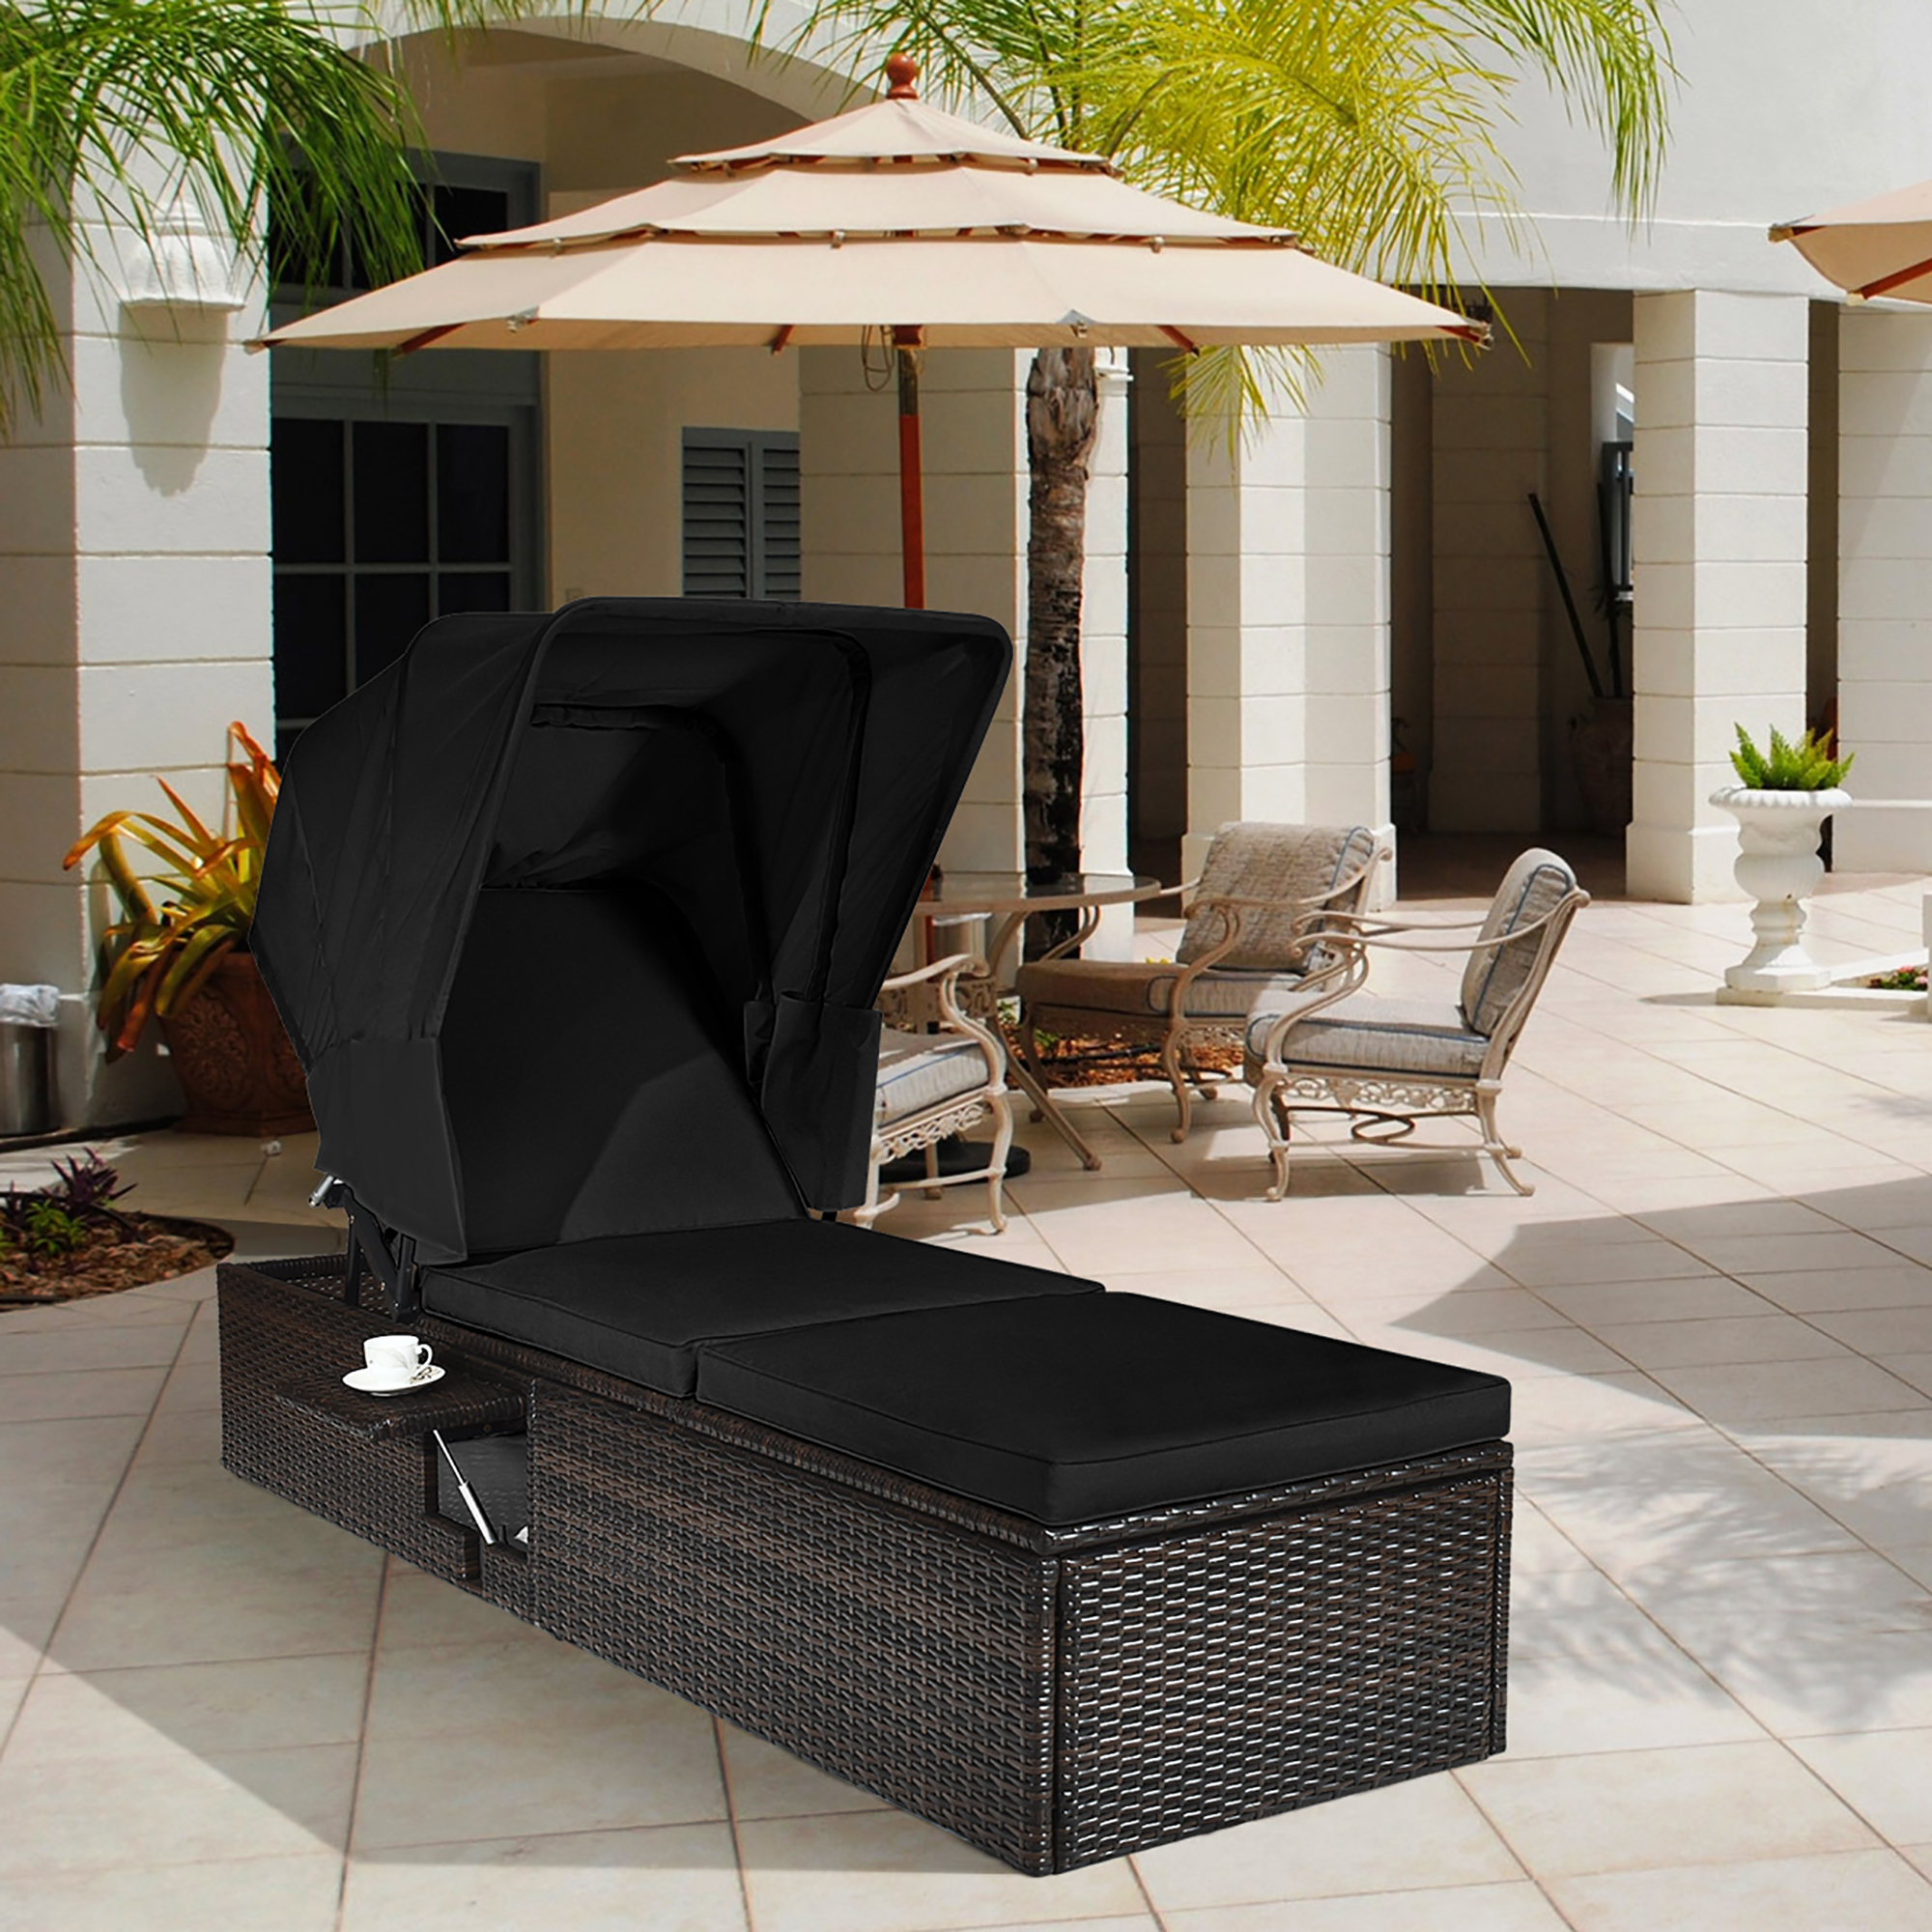 Costway Patio Rattan Lounge Chair Chaise Cushioned Top Canopy Adjustable Tea Table Black - image 1 of 10